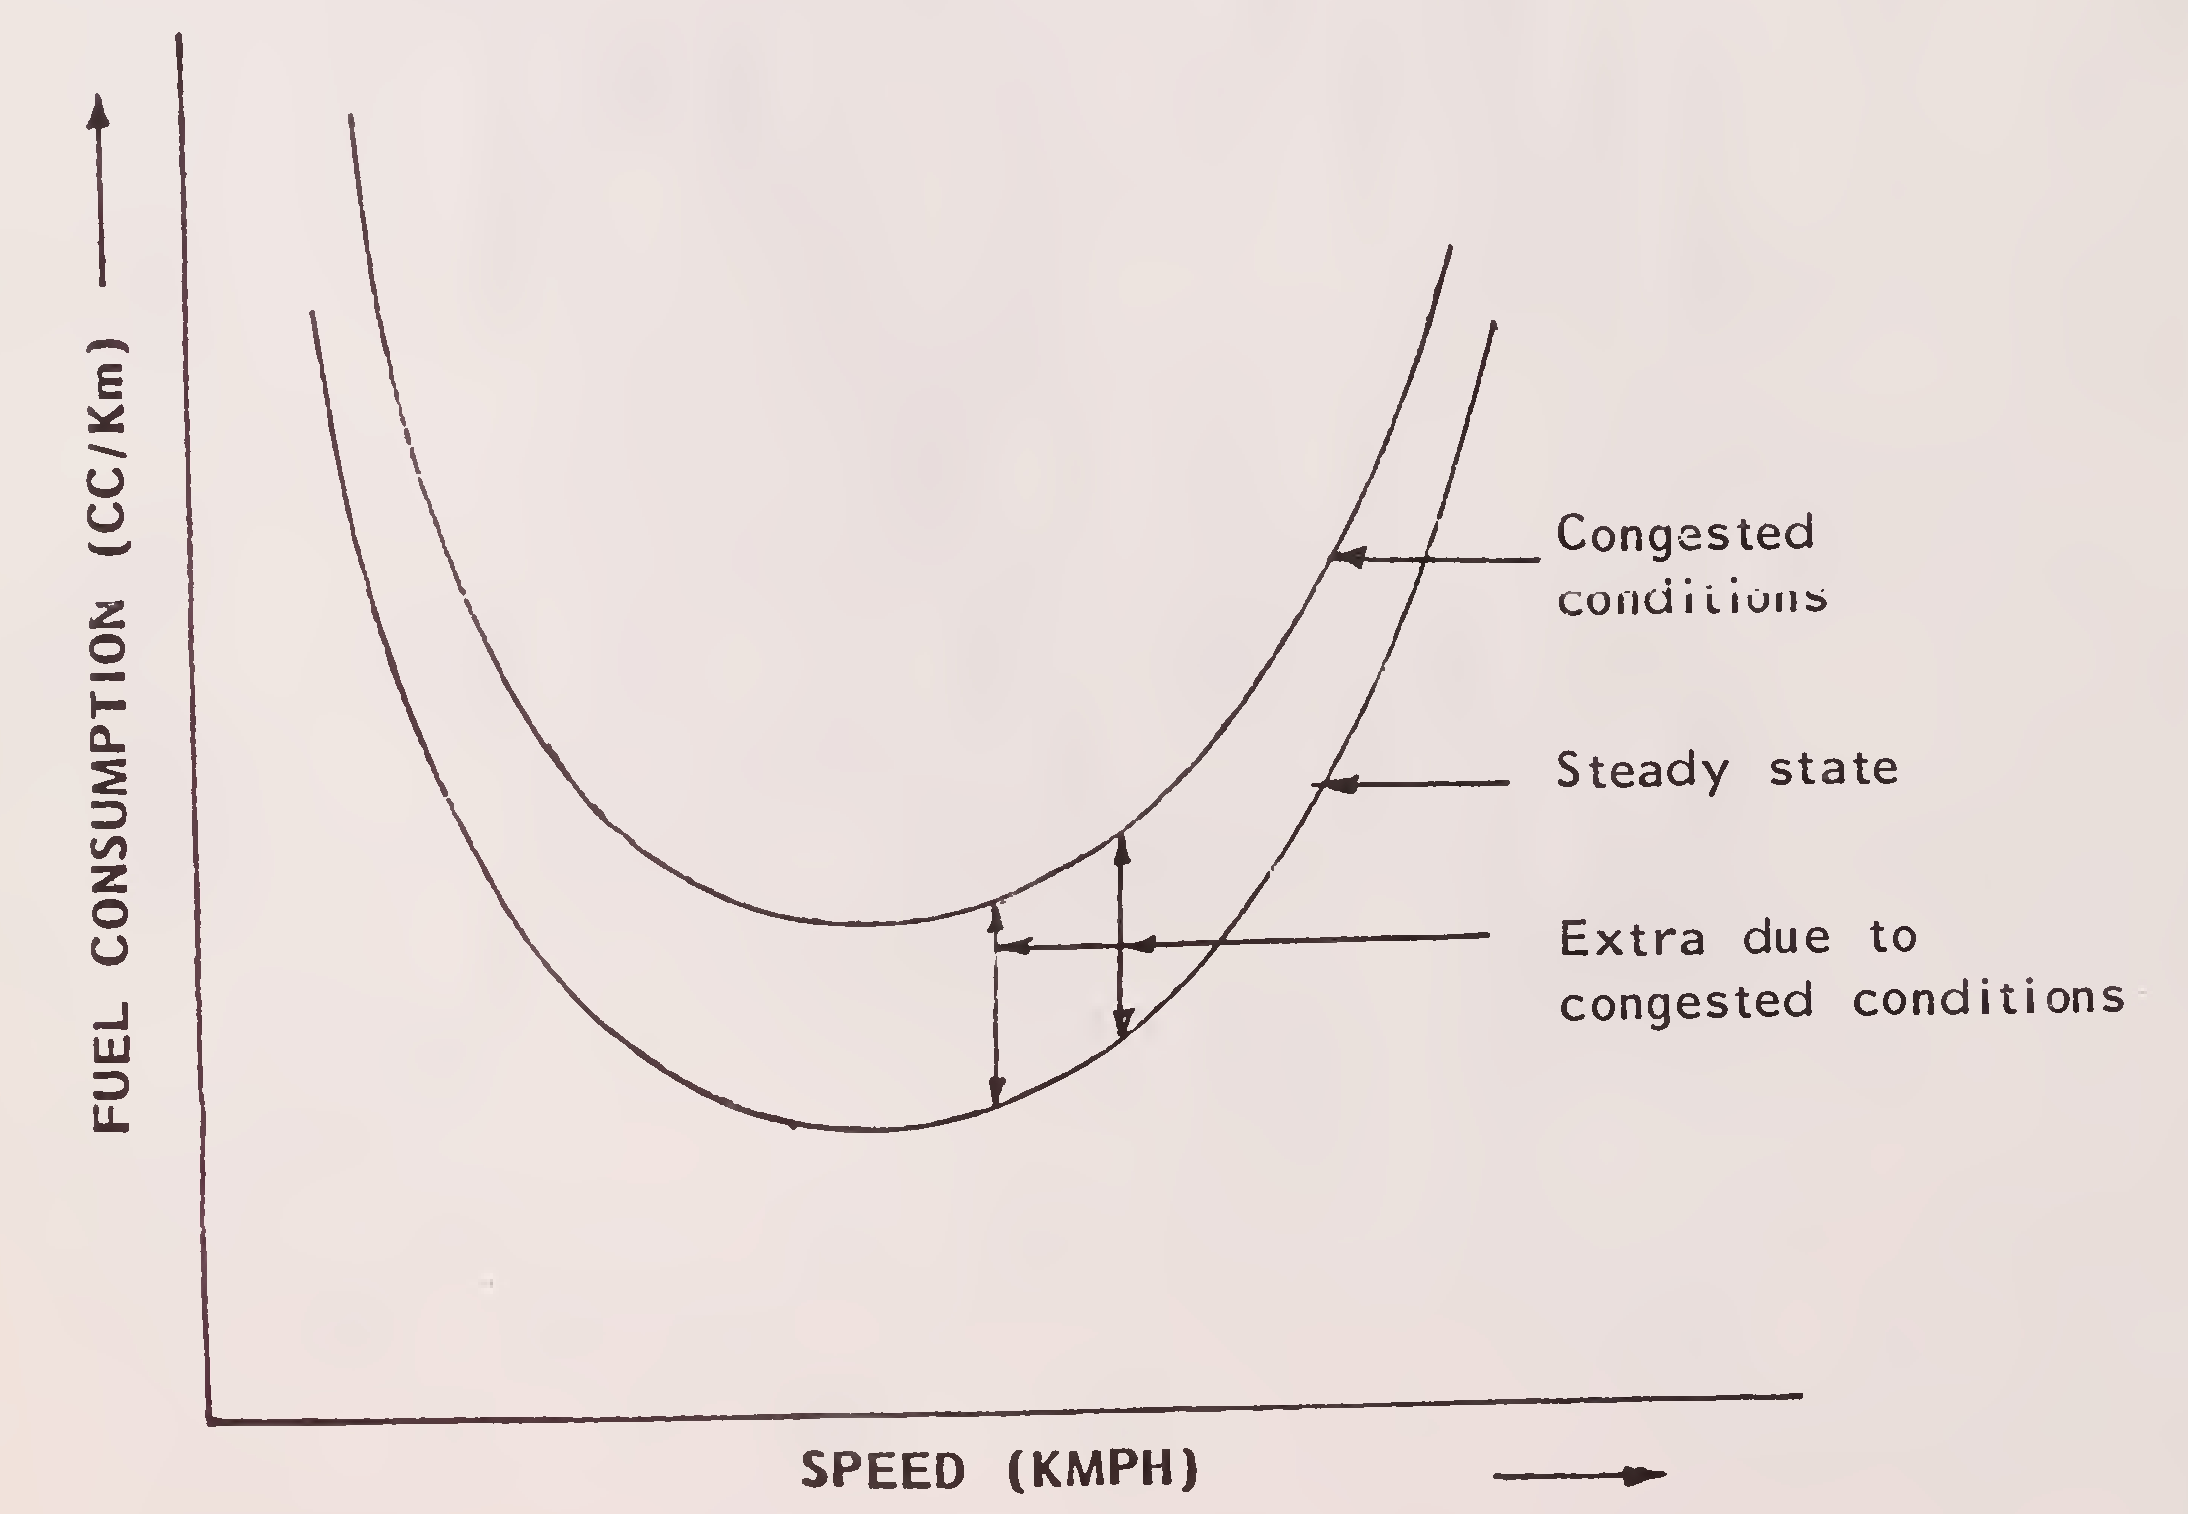 Fig. 28. Fuel consumption under steady state and congested conditions